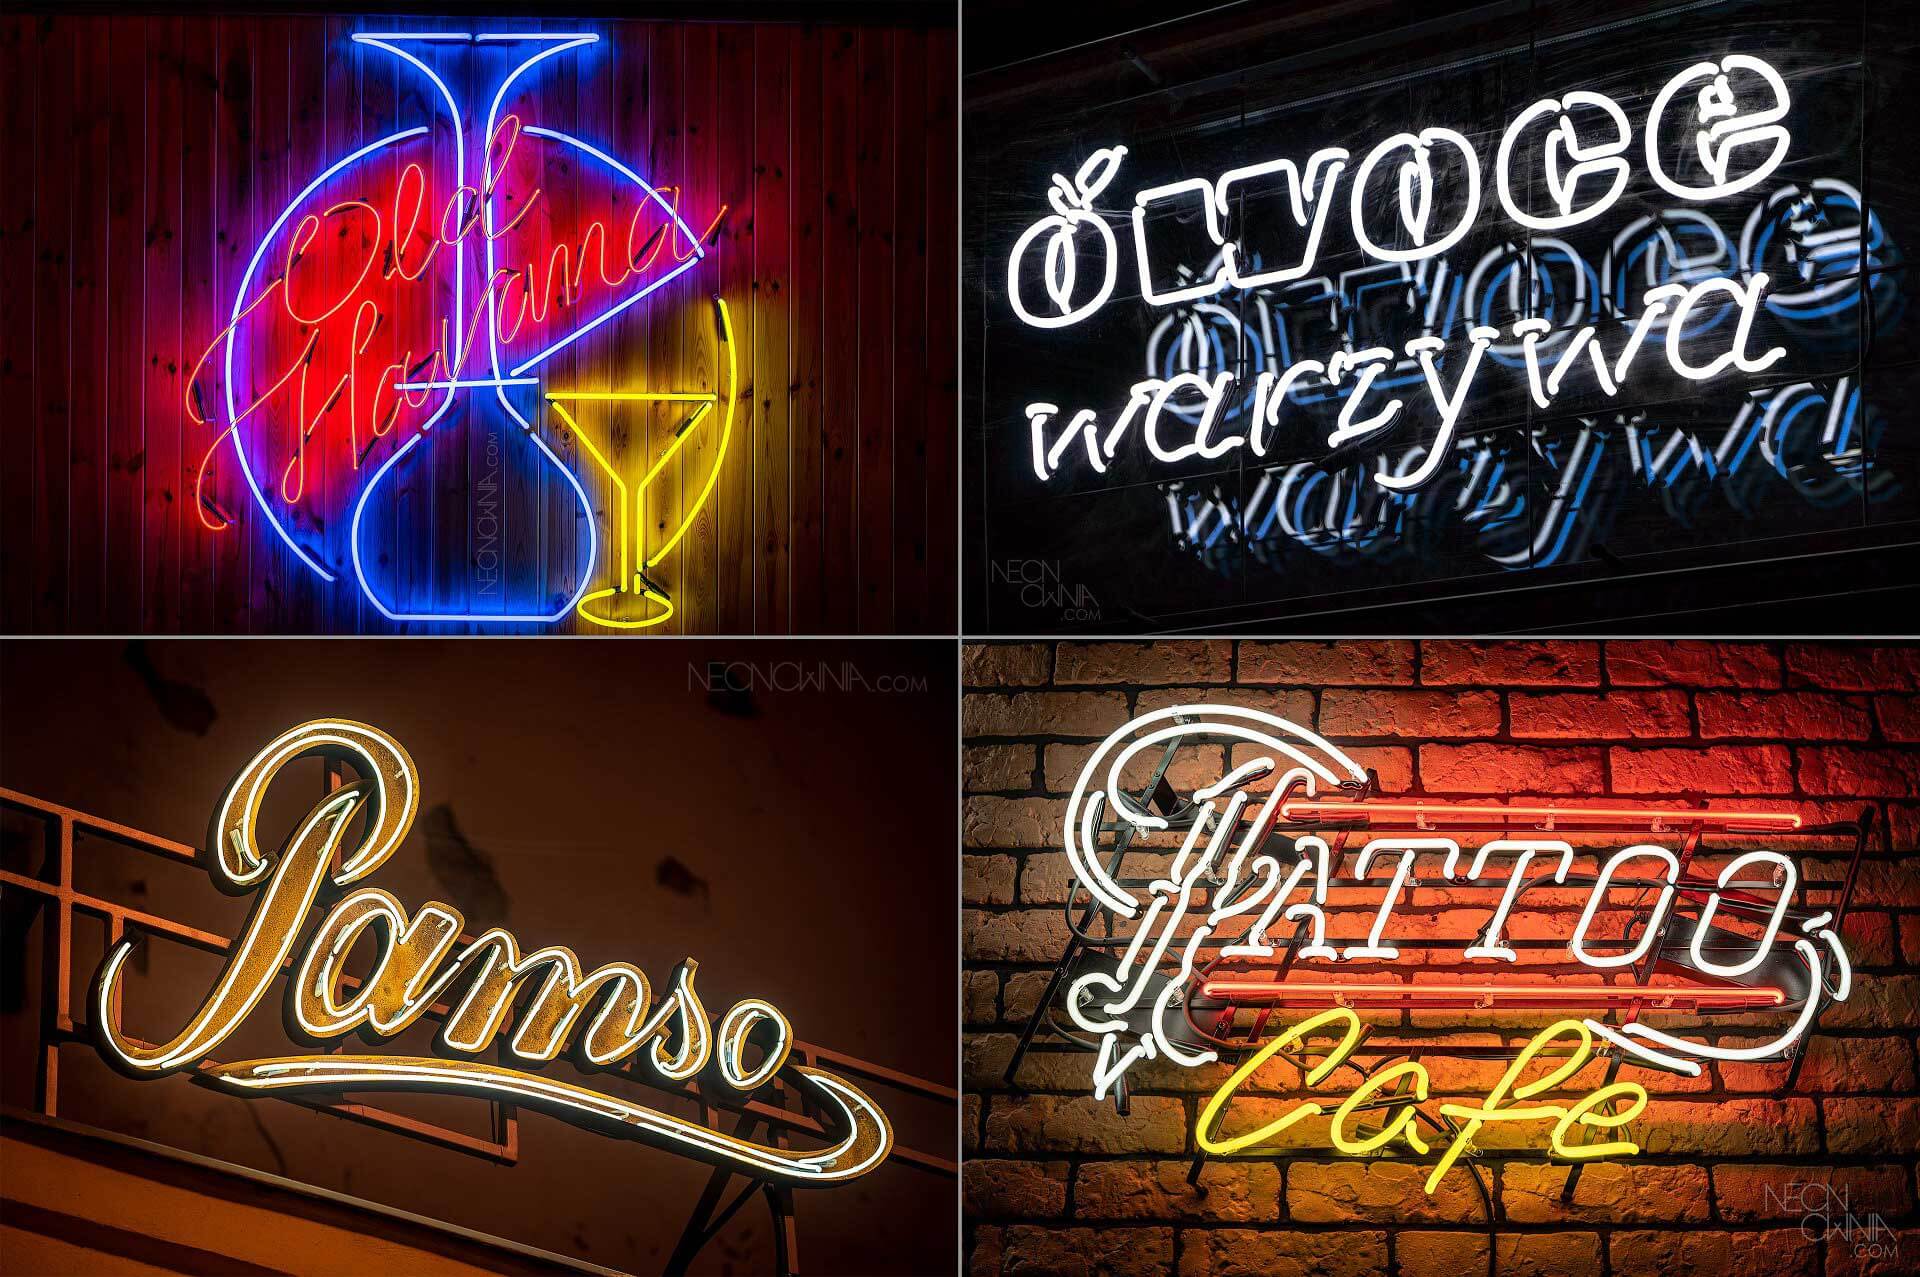 Classic glass tube neon sign